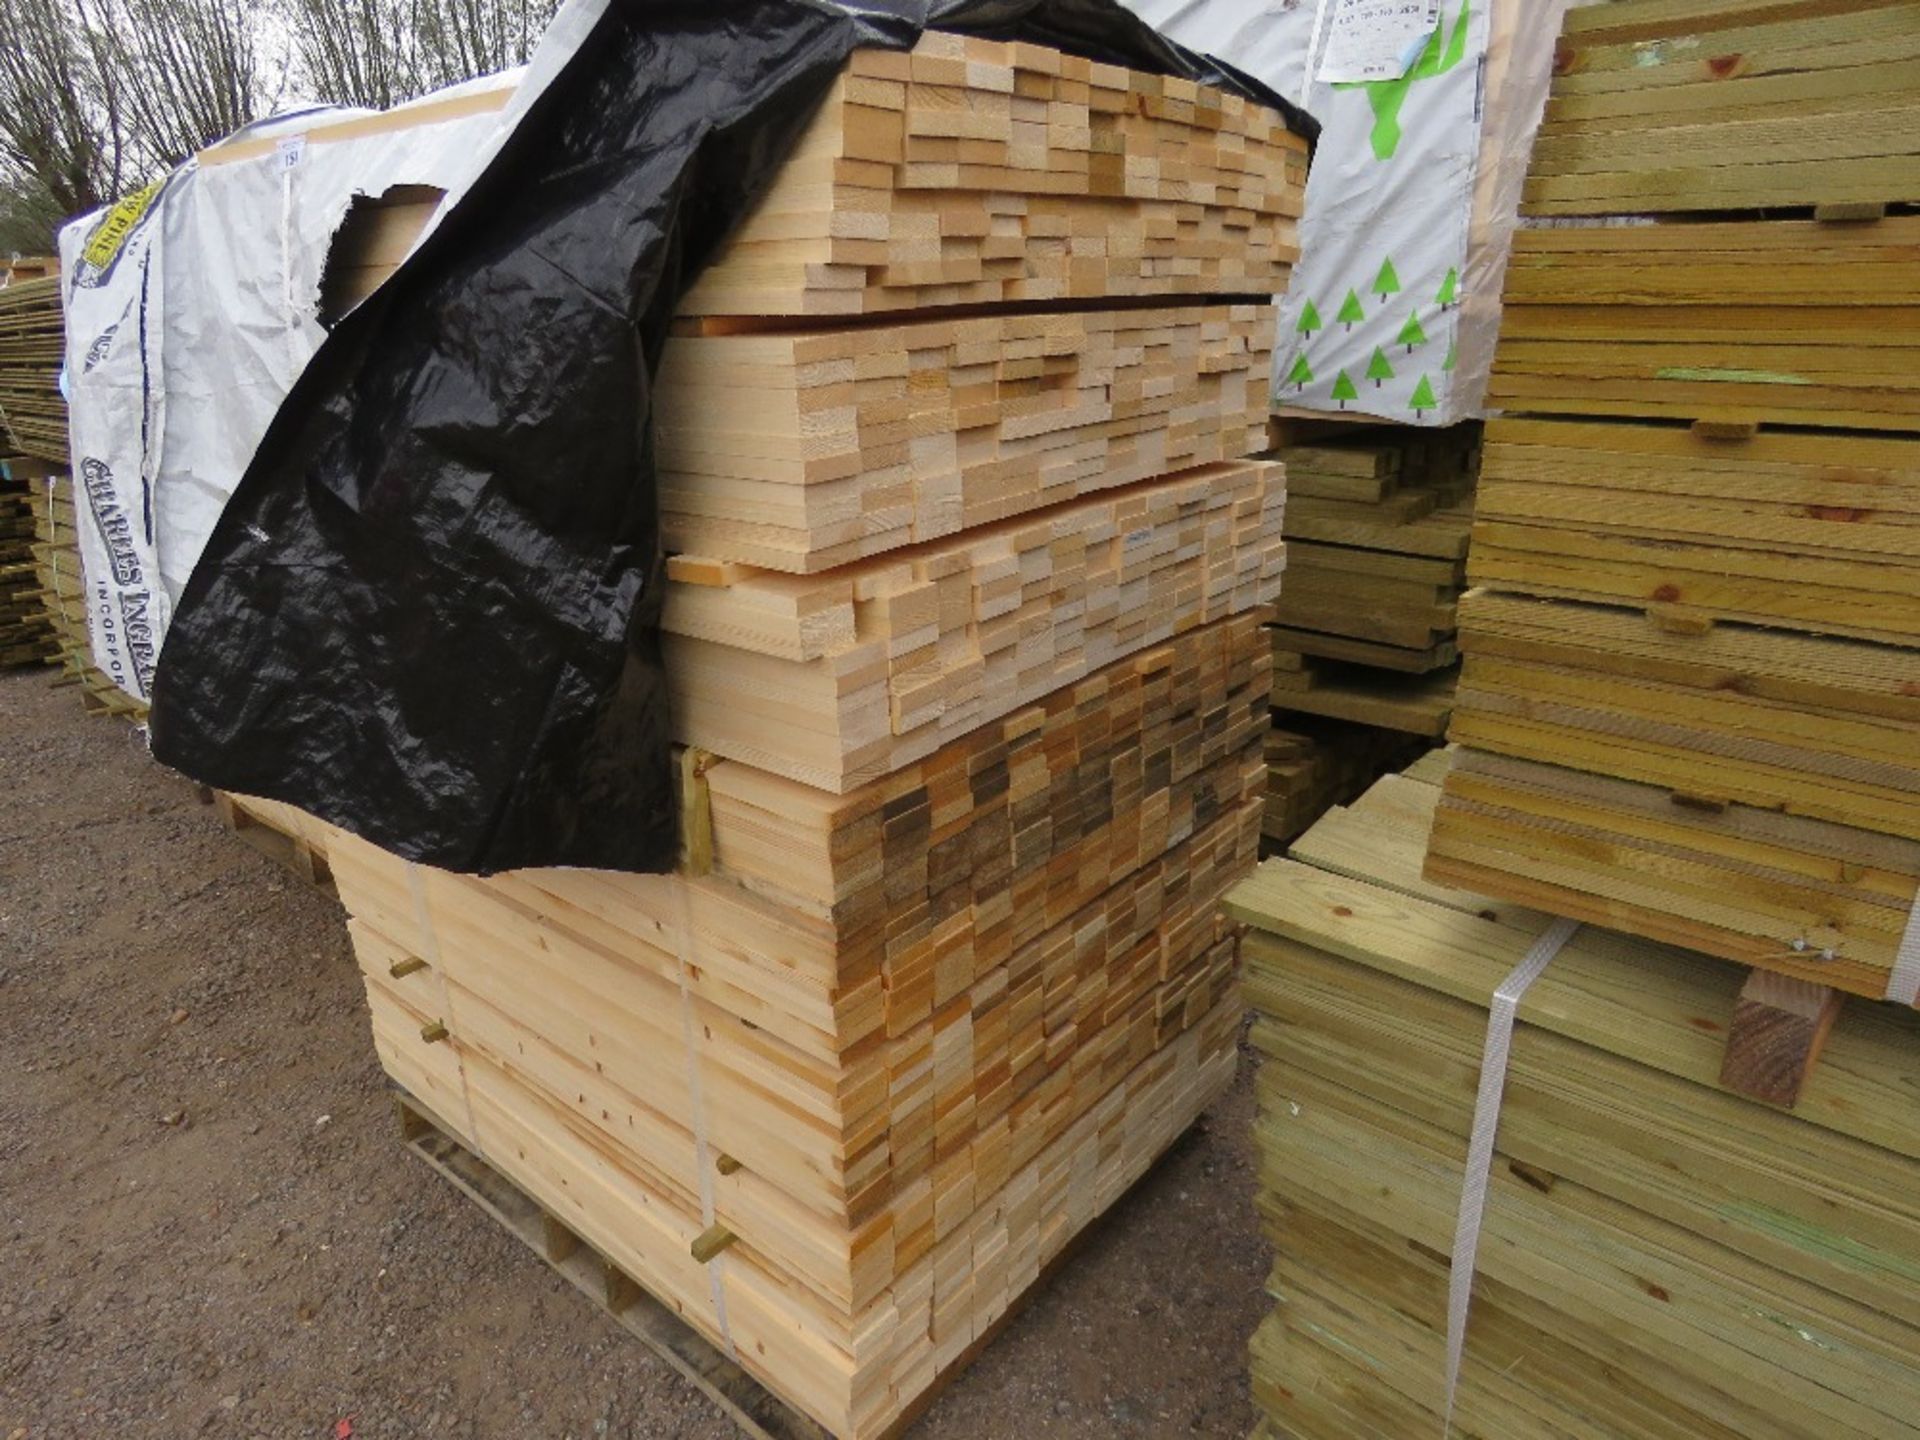 EXTRA LARGE PACK OF UNTREATED FENCE CLADDING TIMBER SLATS. 1.20M LENGTH X 20MM X 70MM WIDTH APPROX. - Image 2 of 3